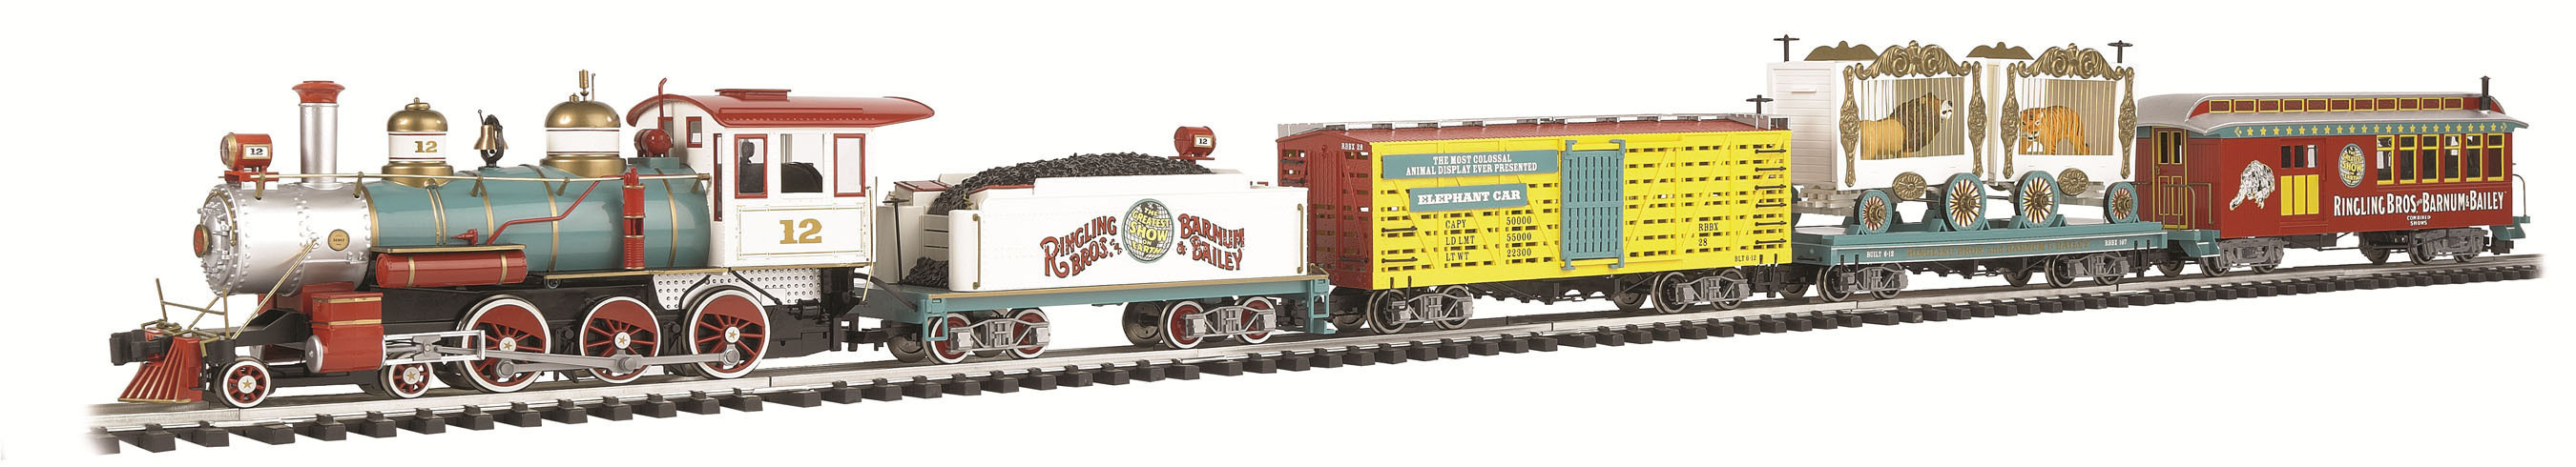 Ringling Bros. and Barnum & Bailey® Circus Rides the Rails With 